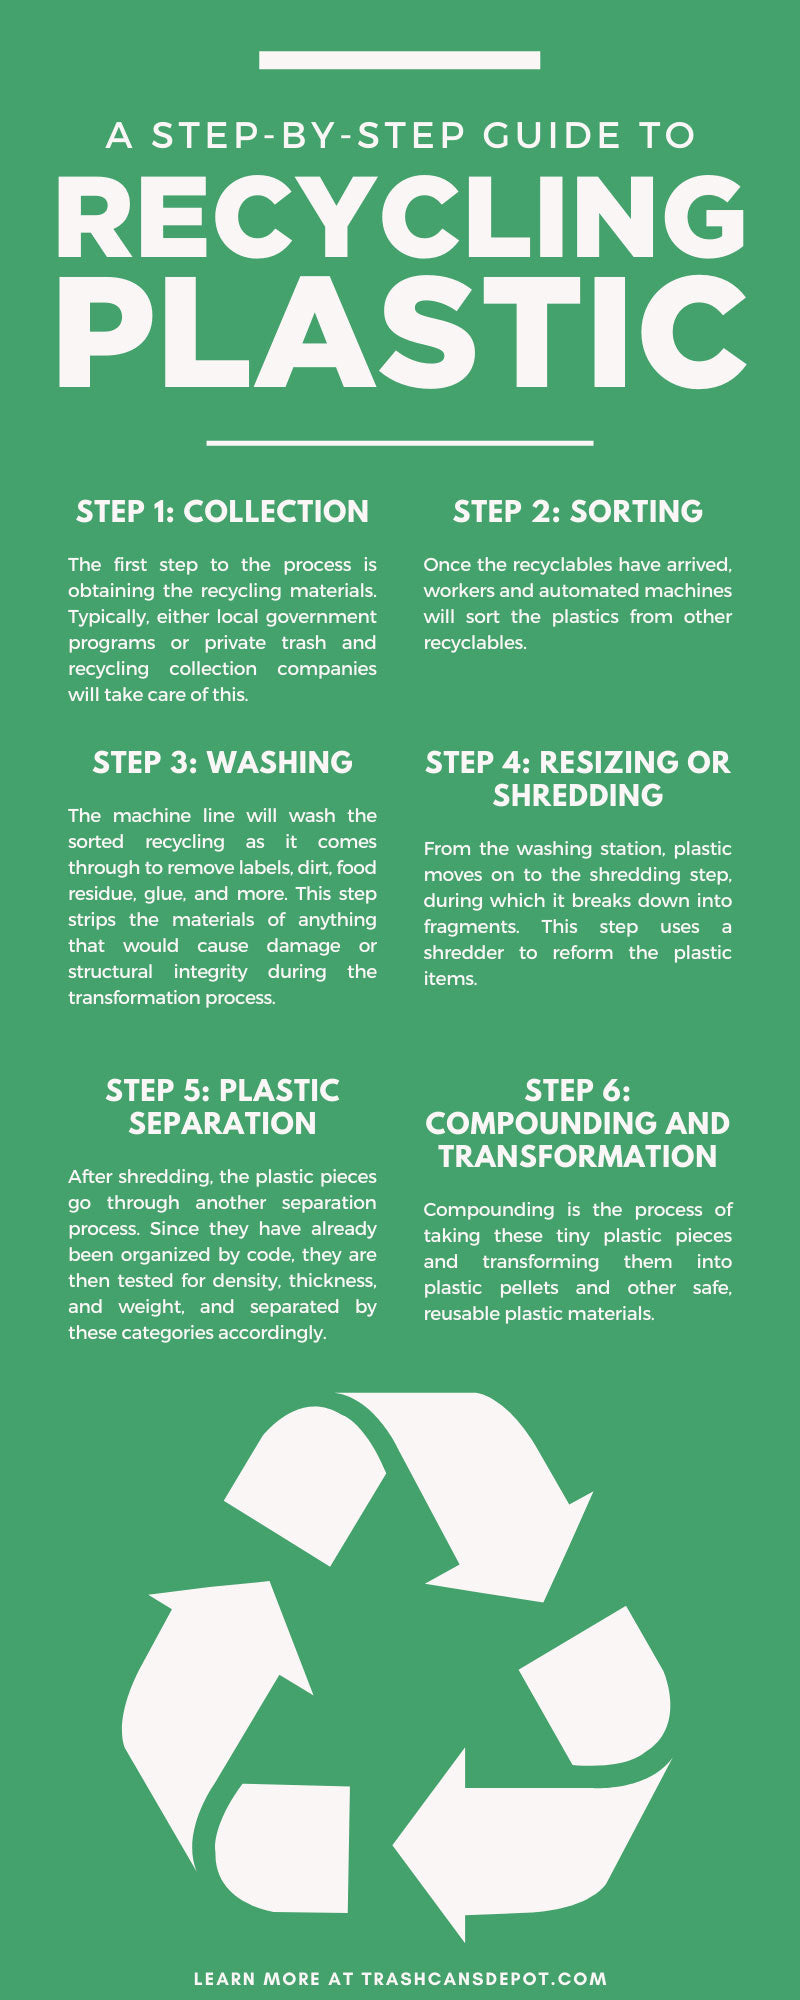 A Step-by-Step Guide To Recycling Plastic